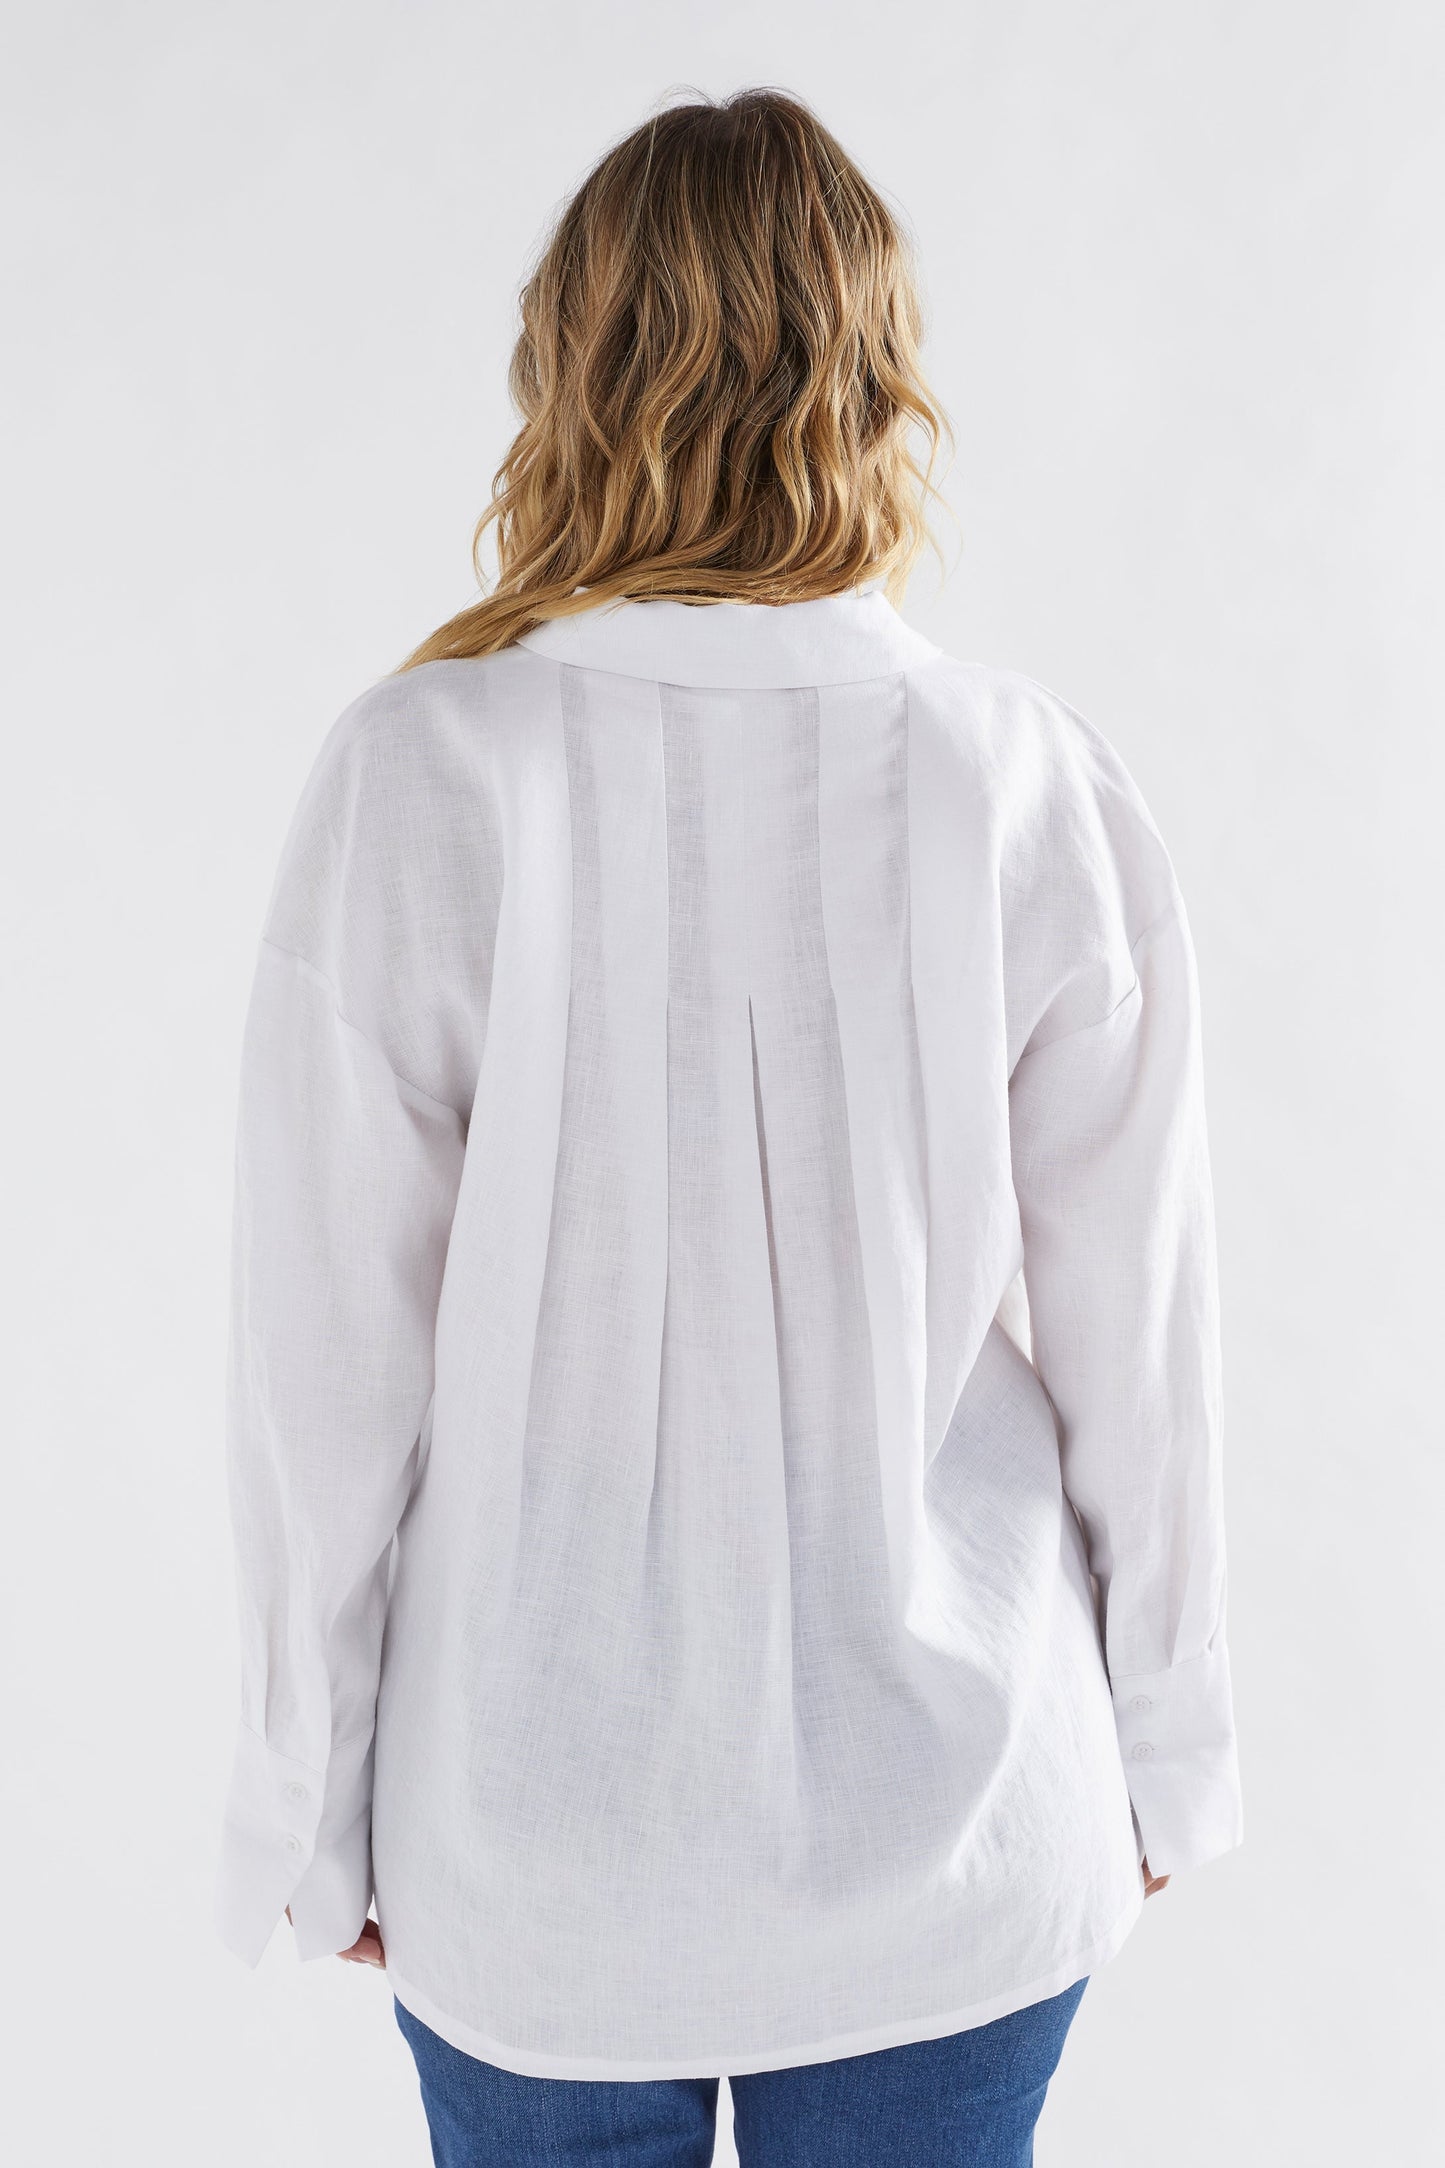 Stilla Linen Shirt with High-Low Hem and Back Pleat Detail Model Back | WHITE